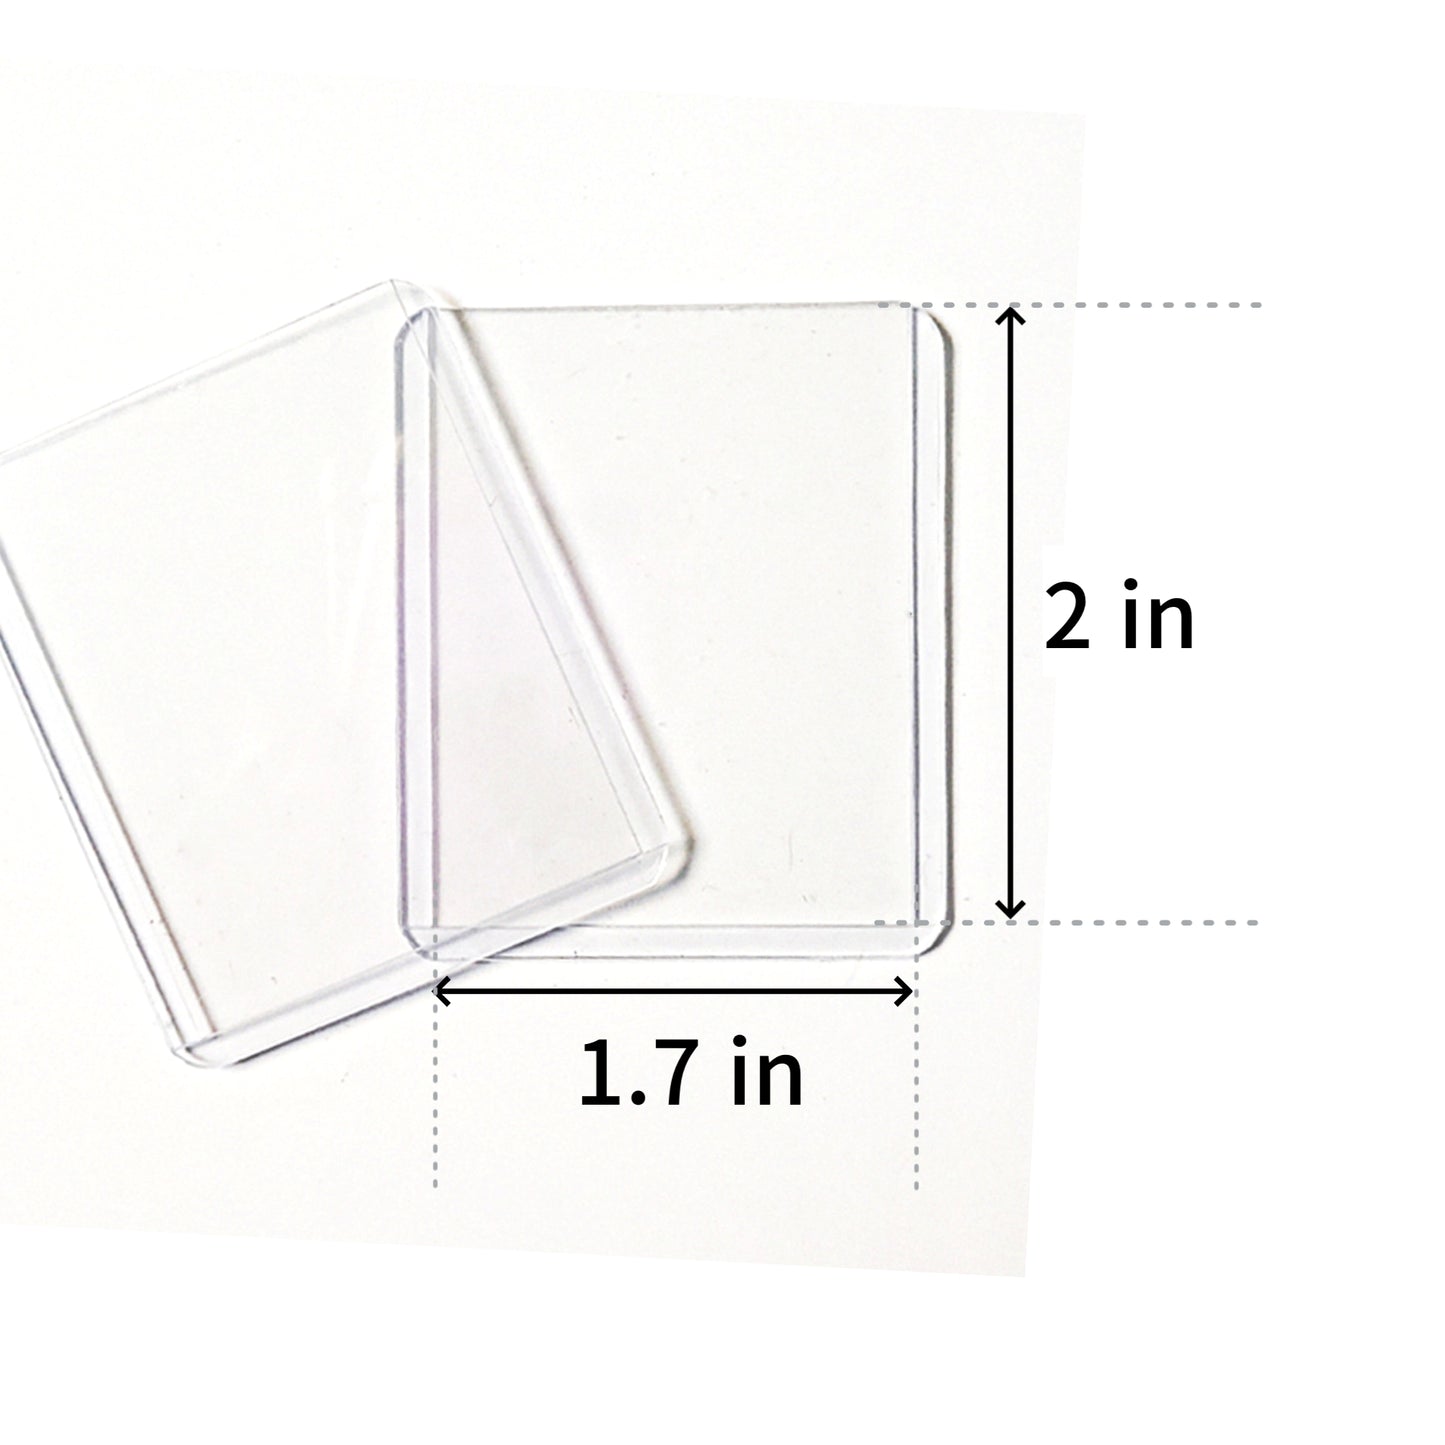 25pcs Mini Size Top Loaders for Passport Picture Size 2 X 1.7 inch